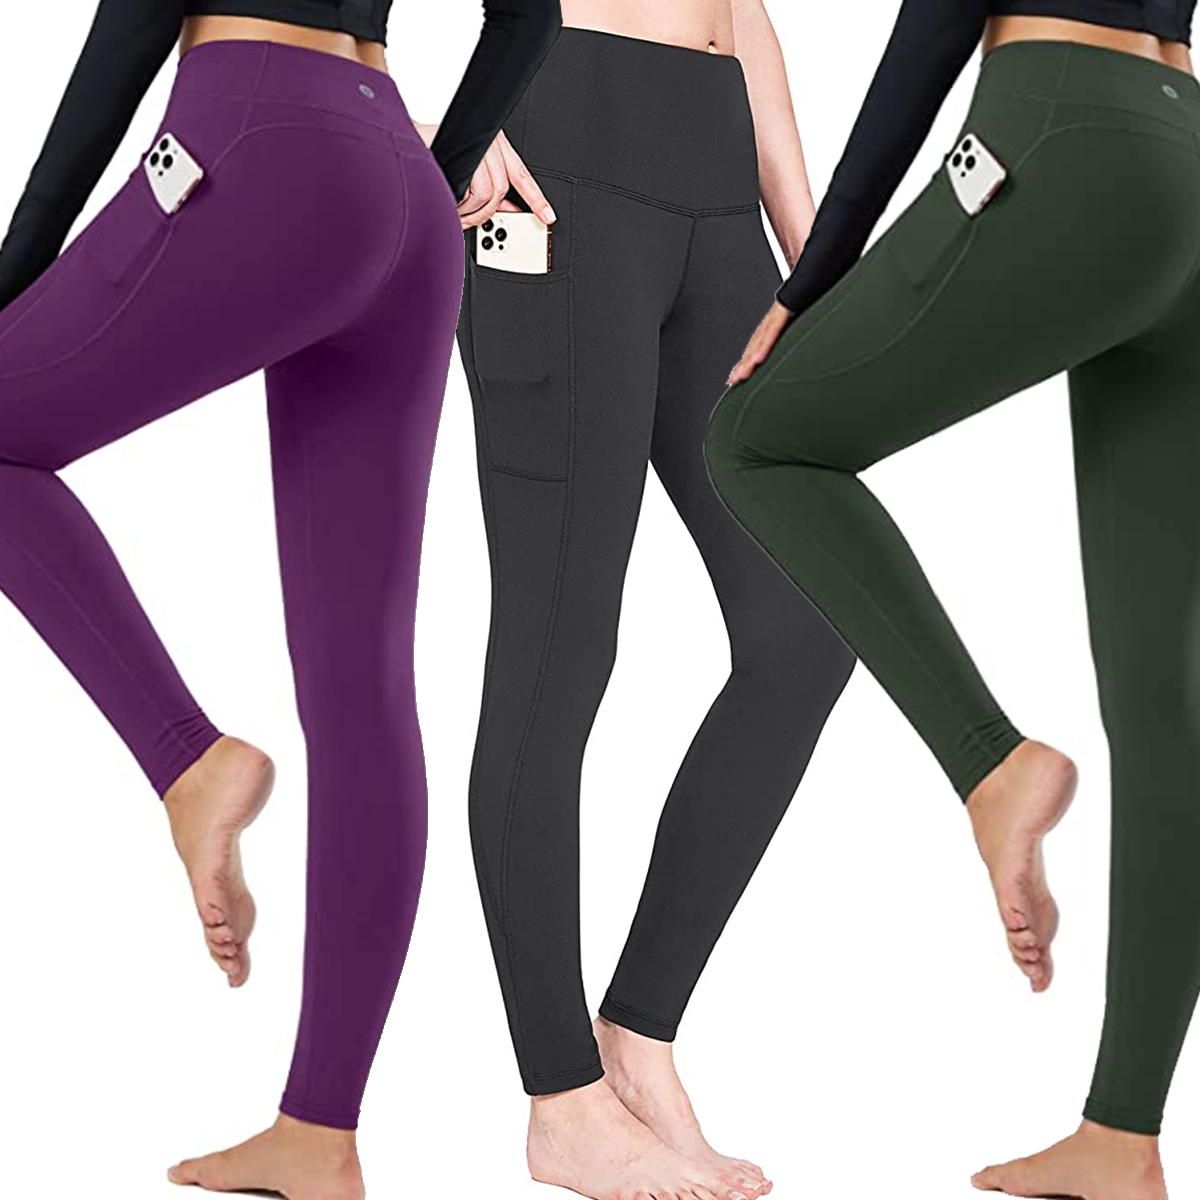 These fleece-lined winter leggings have been described by shoppers